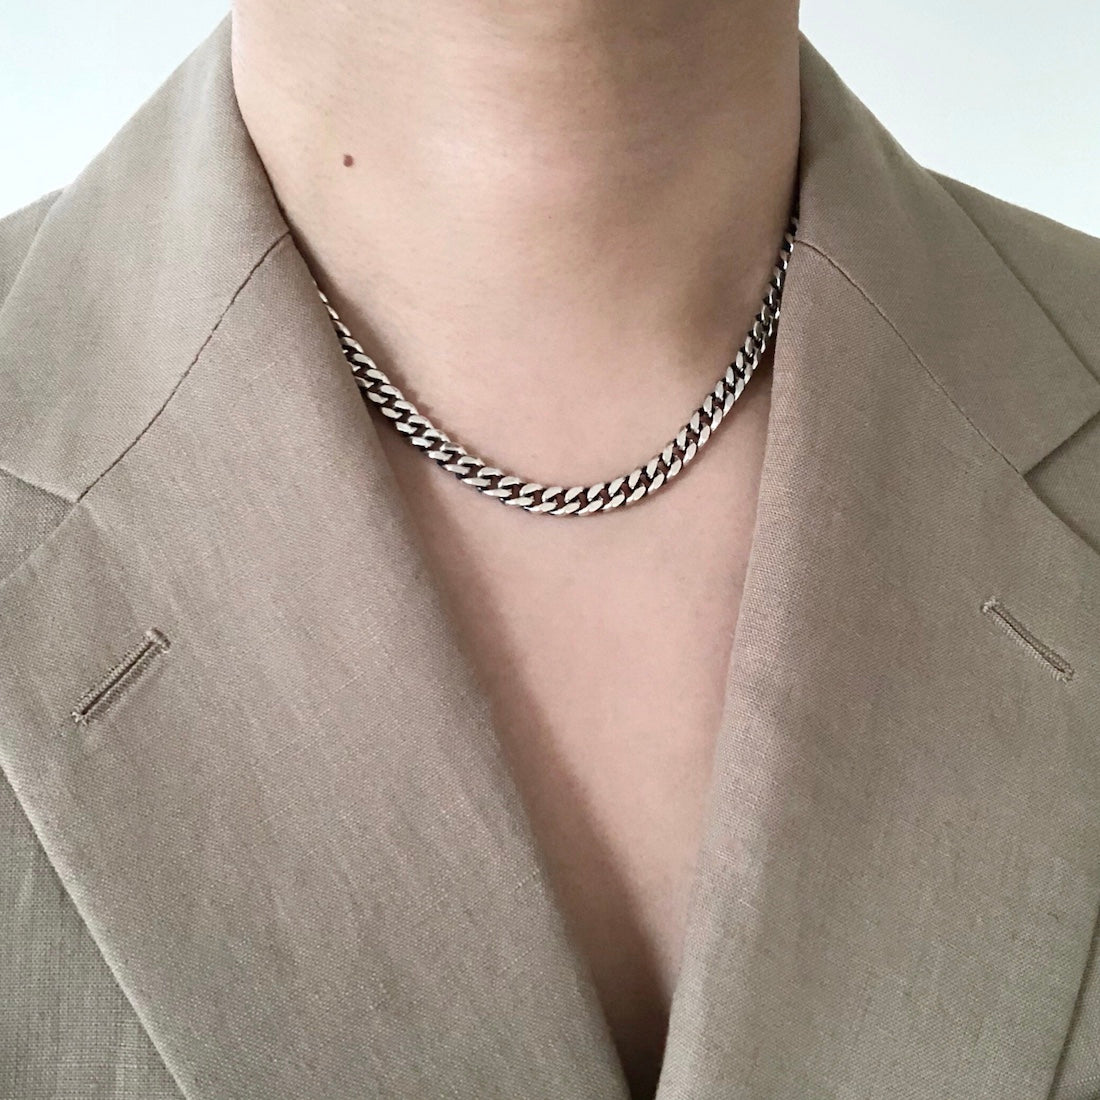 Silver　シルバー９２５　Curb Chain　カーブチェーン　Necklace　ネックレス　着用写真